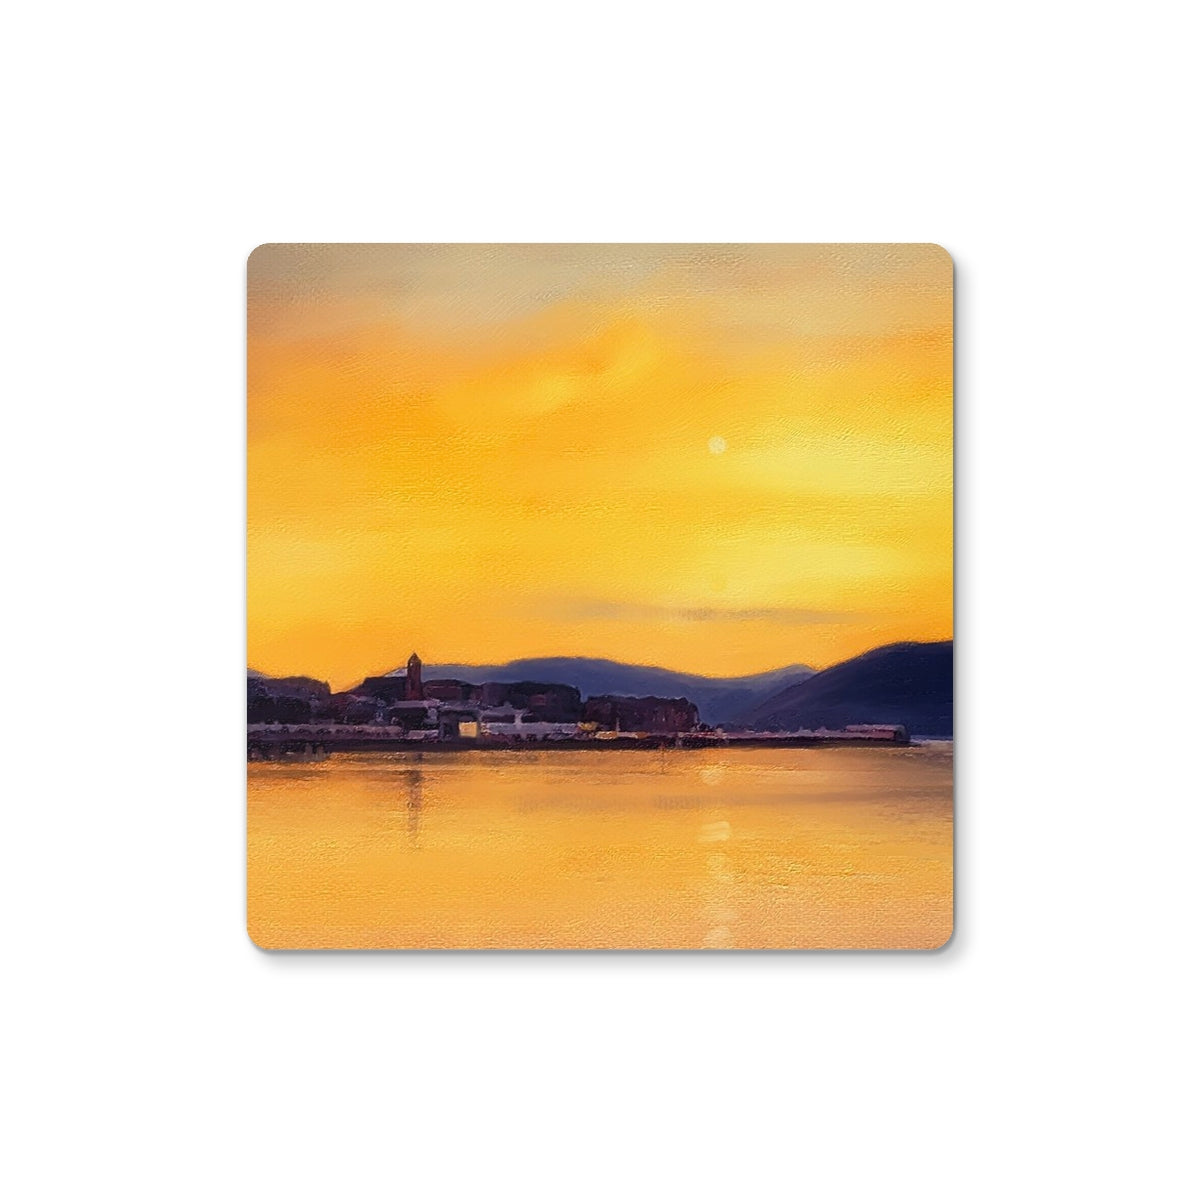 Gourock From Cardwell Bay Art Gifts Coaster-Homeware-River Clyde Art Gallery-2 Coasters-Paintings, Prints, Homeware, Art Gifts From Scotland By Scottish Artist Kevin Hunter